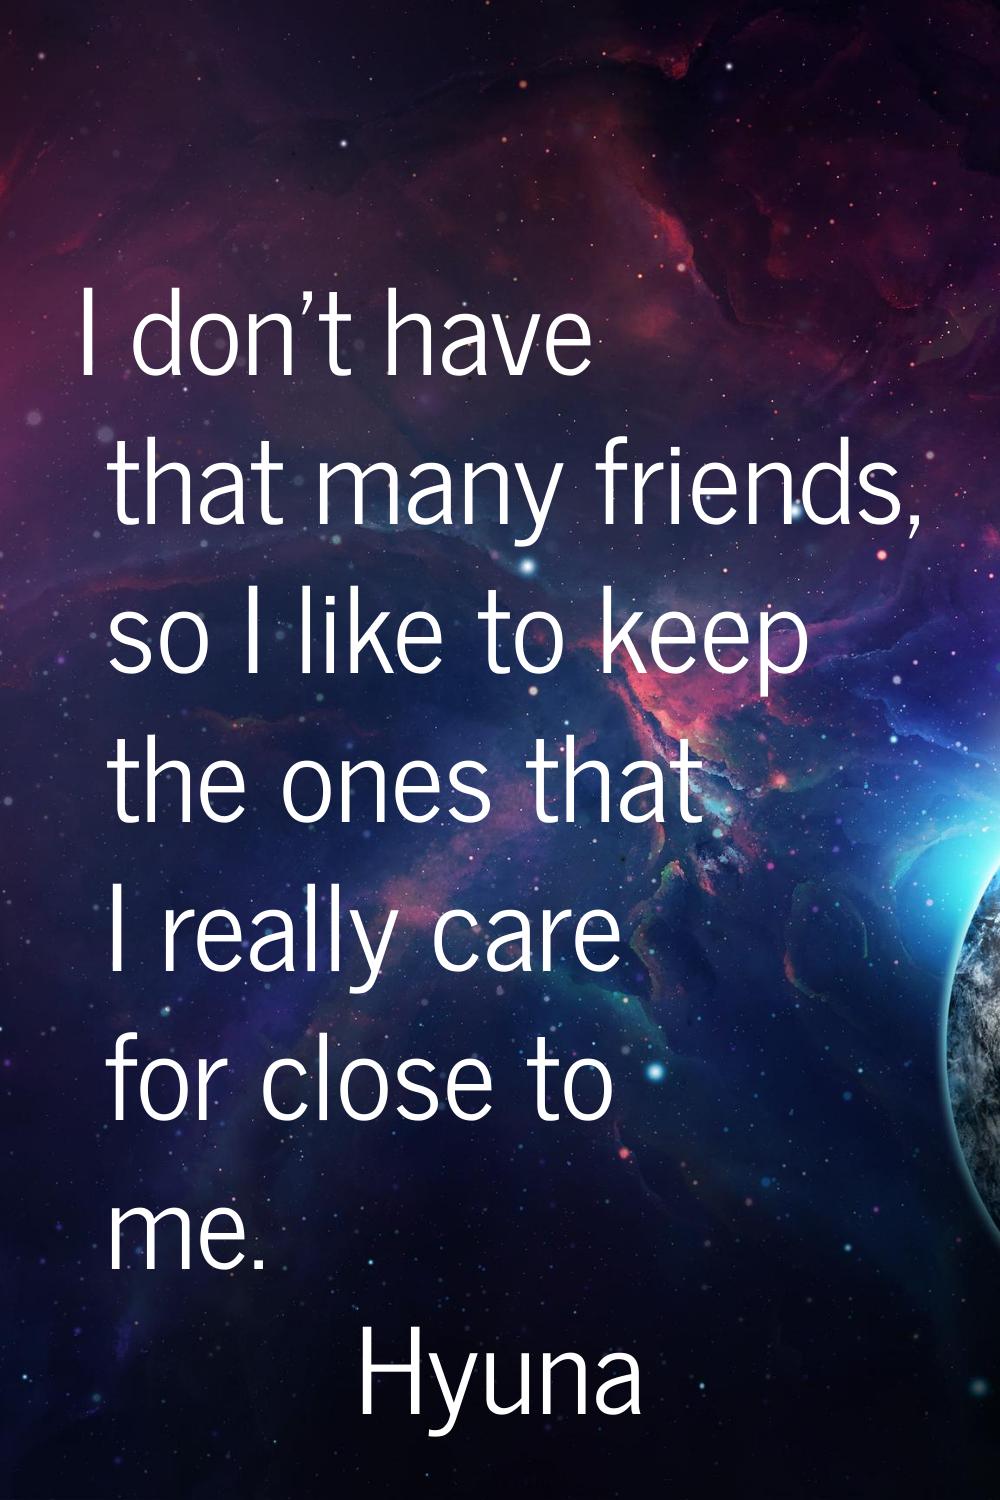 I don't have that many friends, so I like to keep the ones that I really care for close to me.